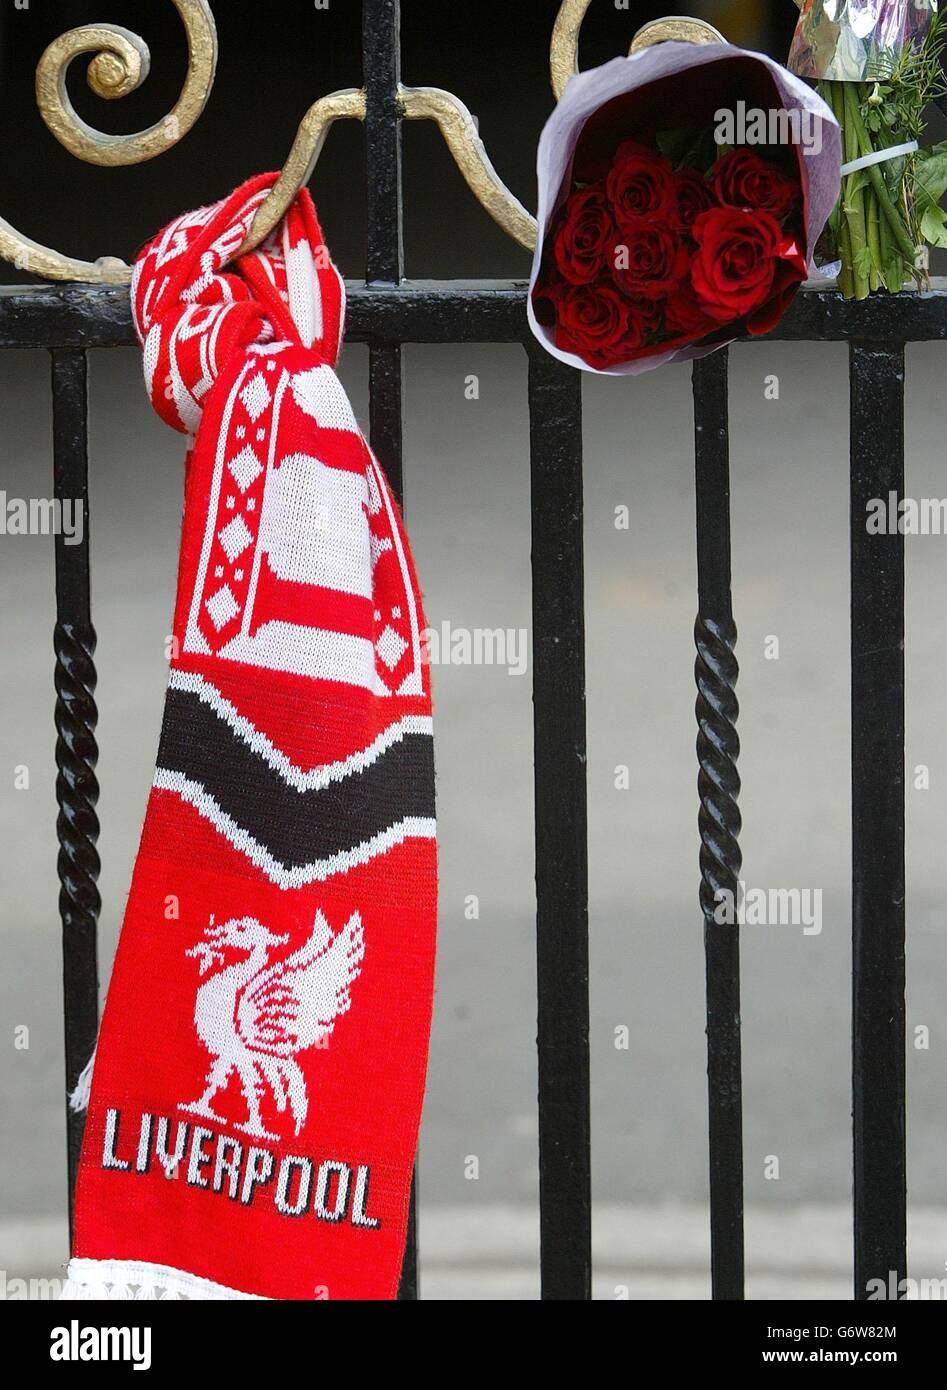 A Liverpool scarf is tied to the Shankly gates of Liverpool Football Club's Anfield stadium, on the 15th anniversary of the Hillsborough disaster. Where a memorial service was taking place at the Kop stand. A candle will be lit for each of the 96 victims who were crushed to death on the Leppings Lane terrace of Sheffield Wednesday's Hillsborough ground during Liverpool's 1989 FA Cup semi-final clash. Stock Photo